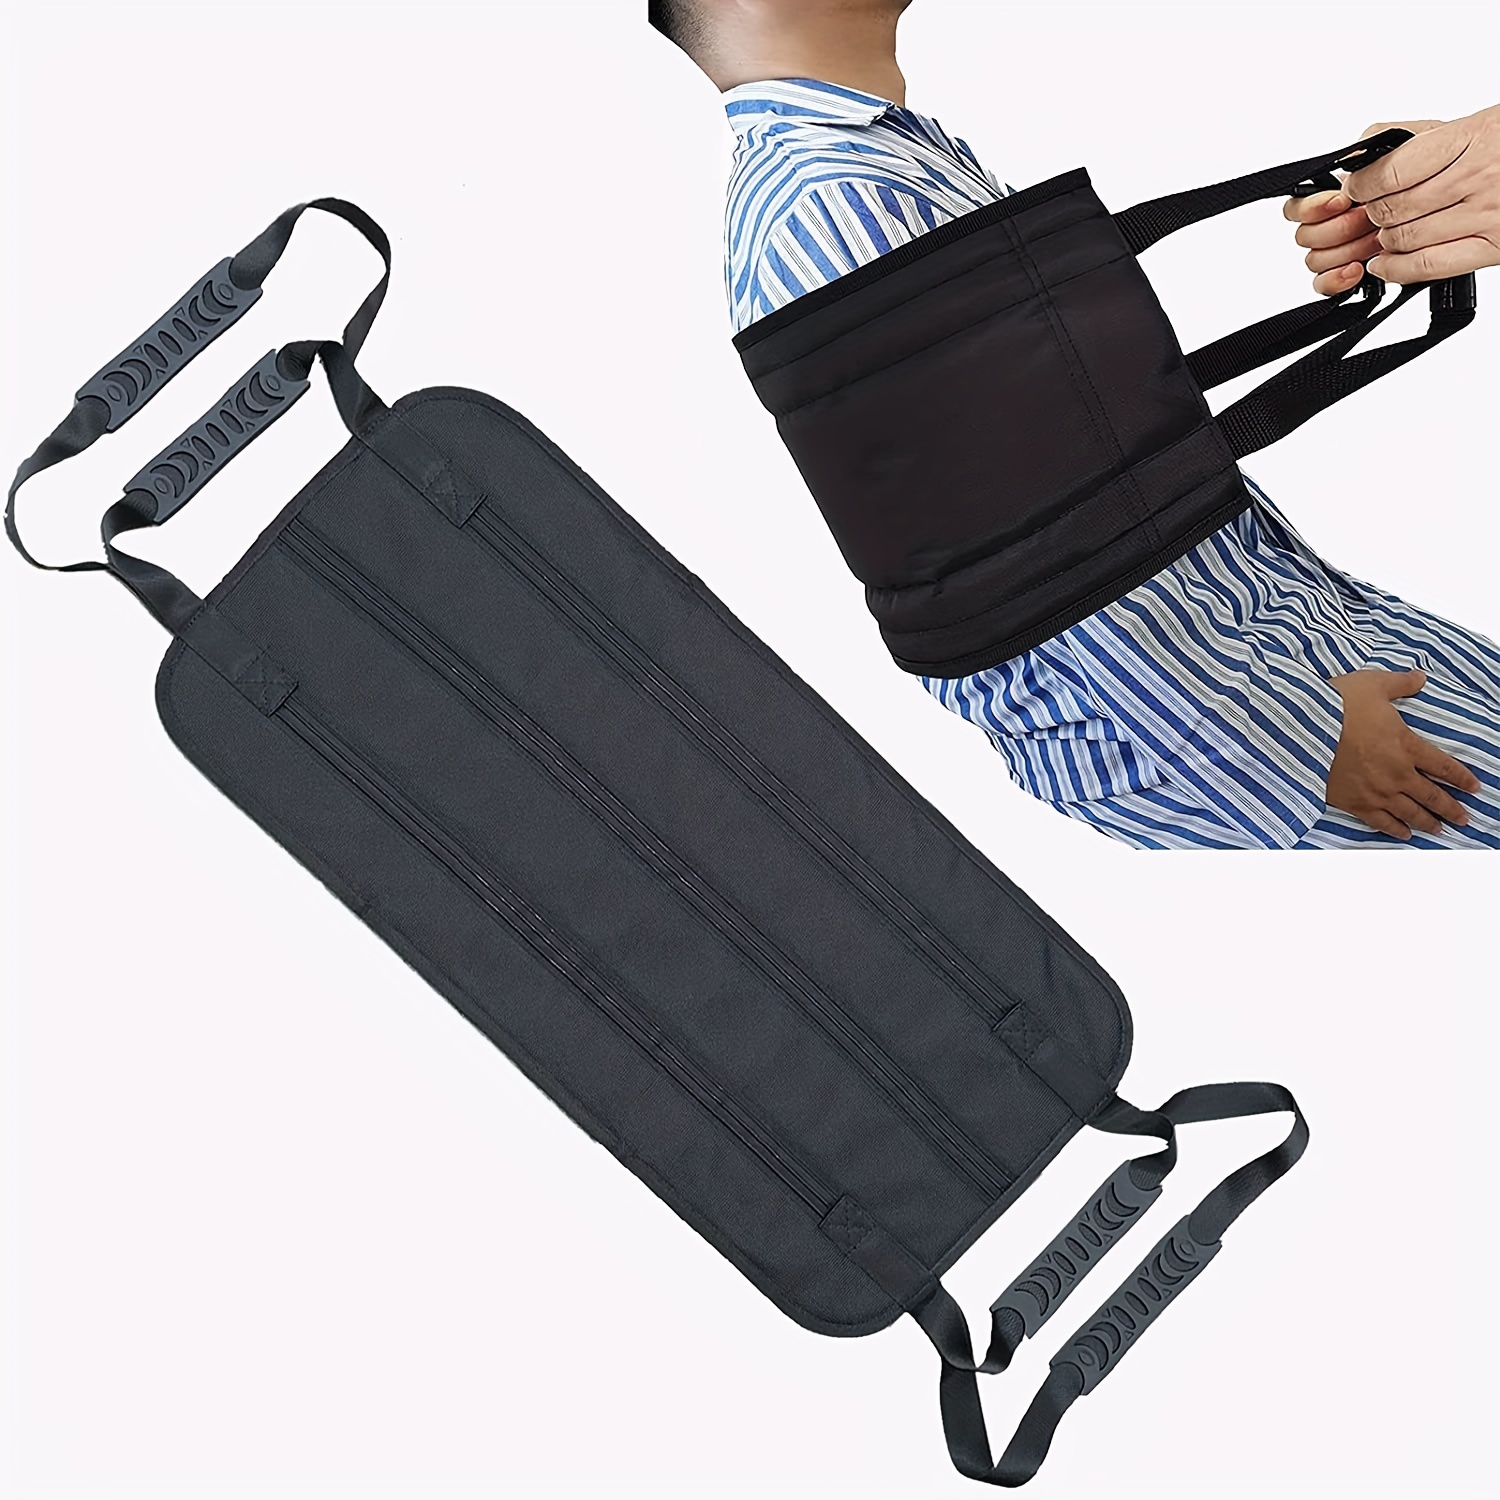 Patient Transfer Sling Gait Belt Padded Breathable Patient Lift  Transferring Belt Mobility Aids For Elderly Disabled Blue